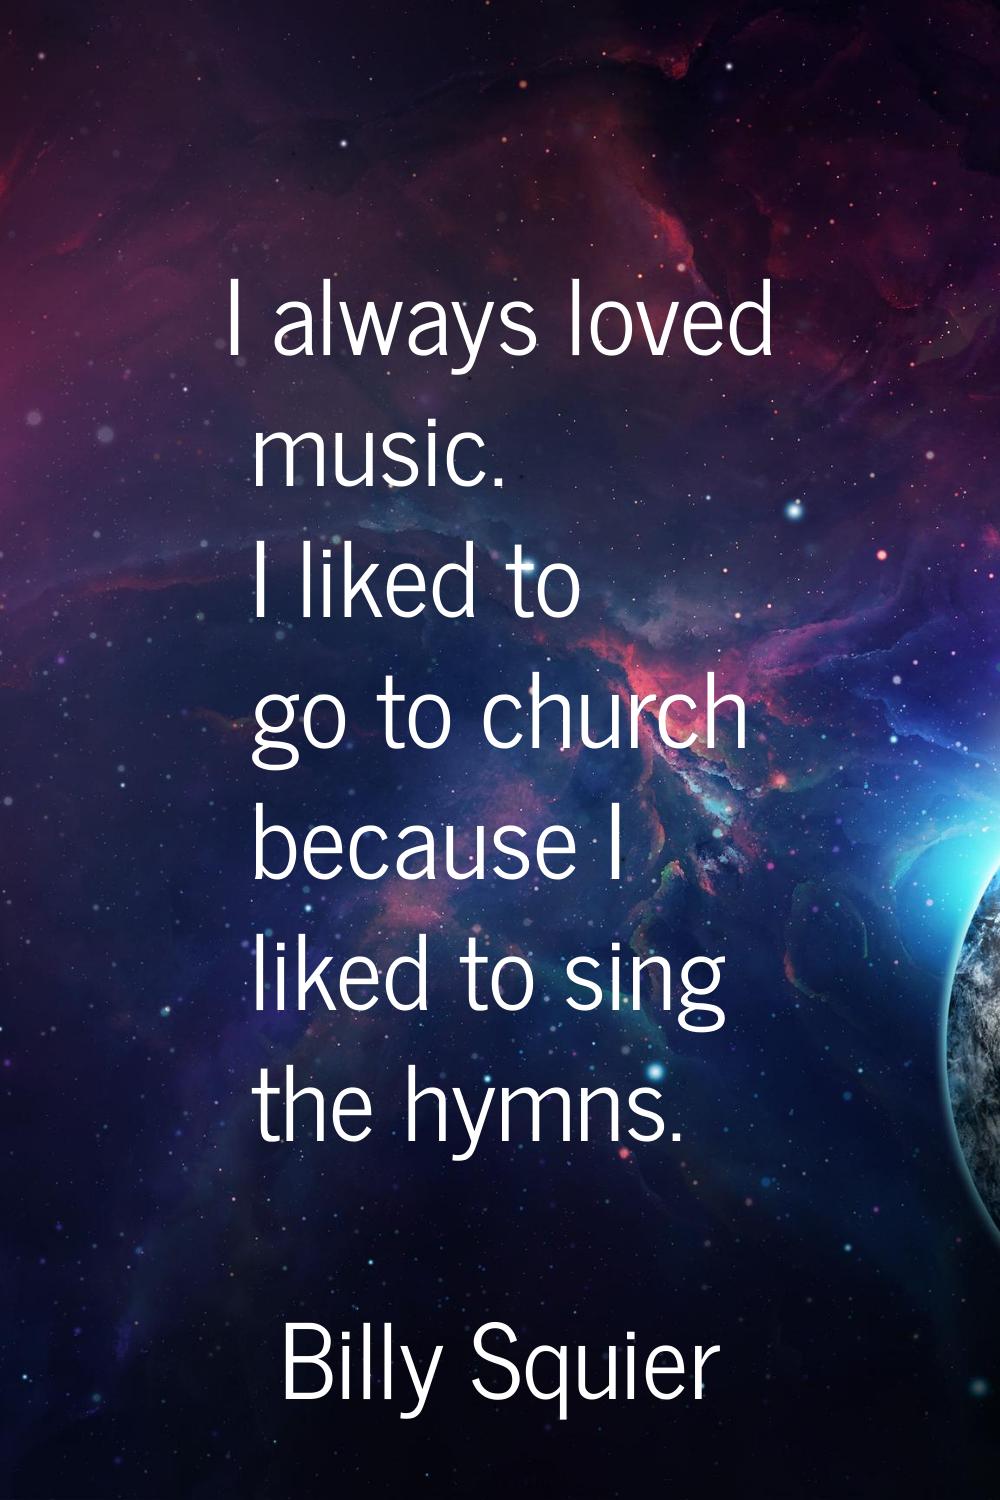 I always loved music. I liked to go to church because I liked to sing the hymns.